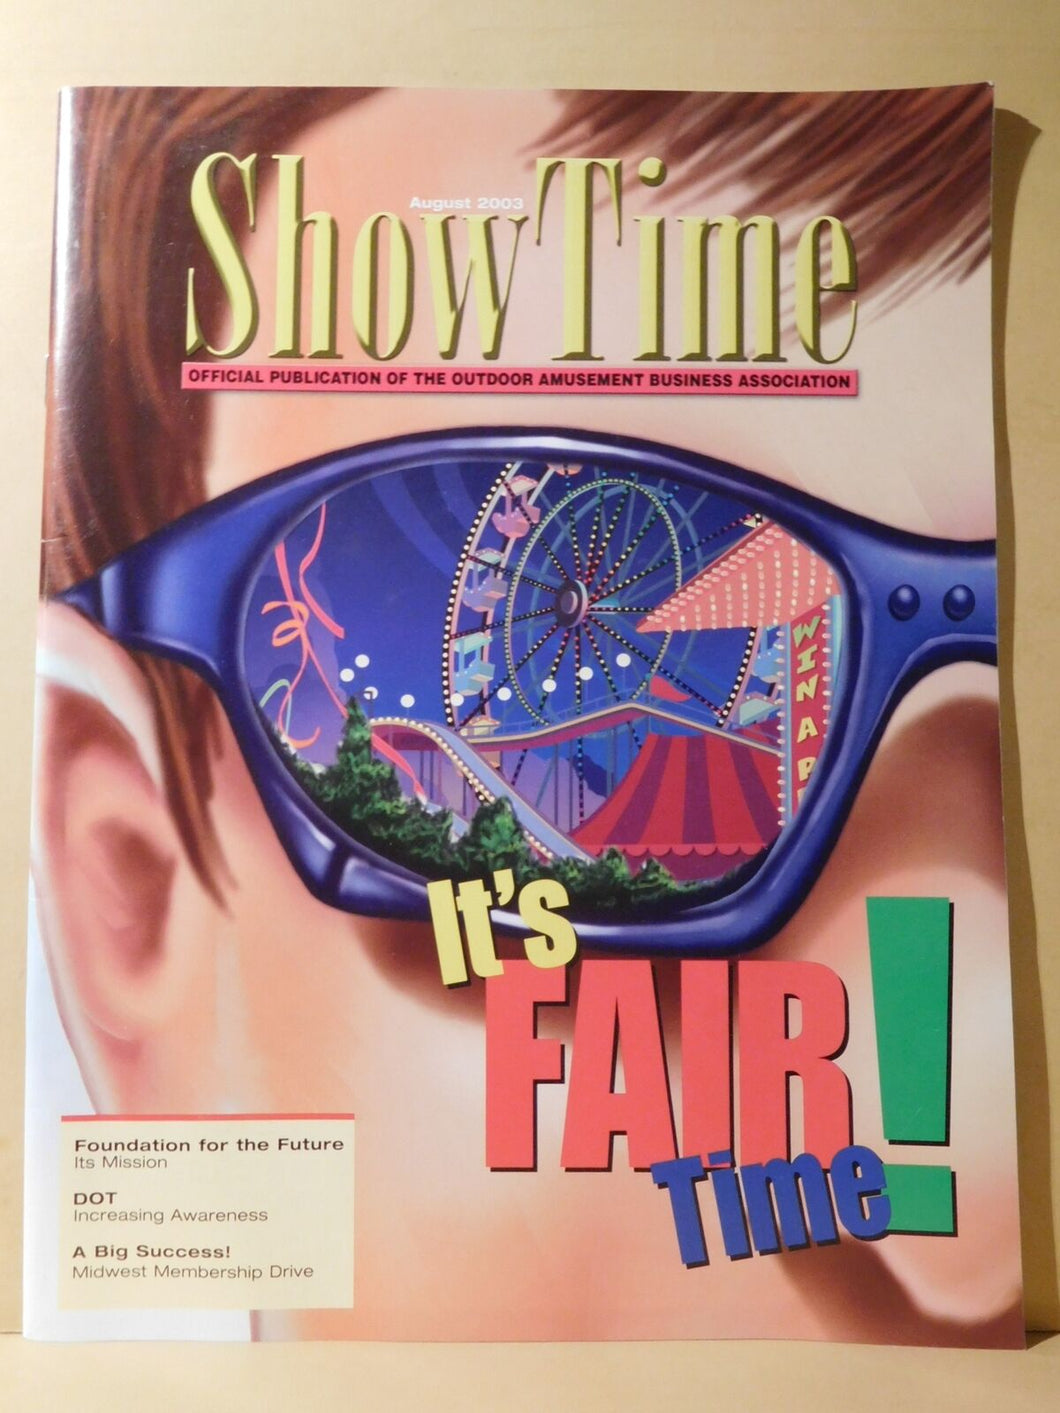 Show Time Magazine 2003 August It’s Fair Time! Circus